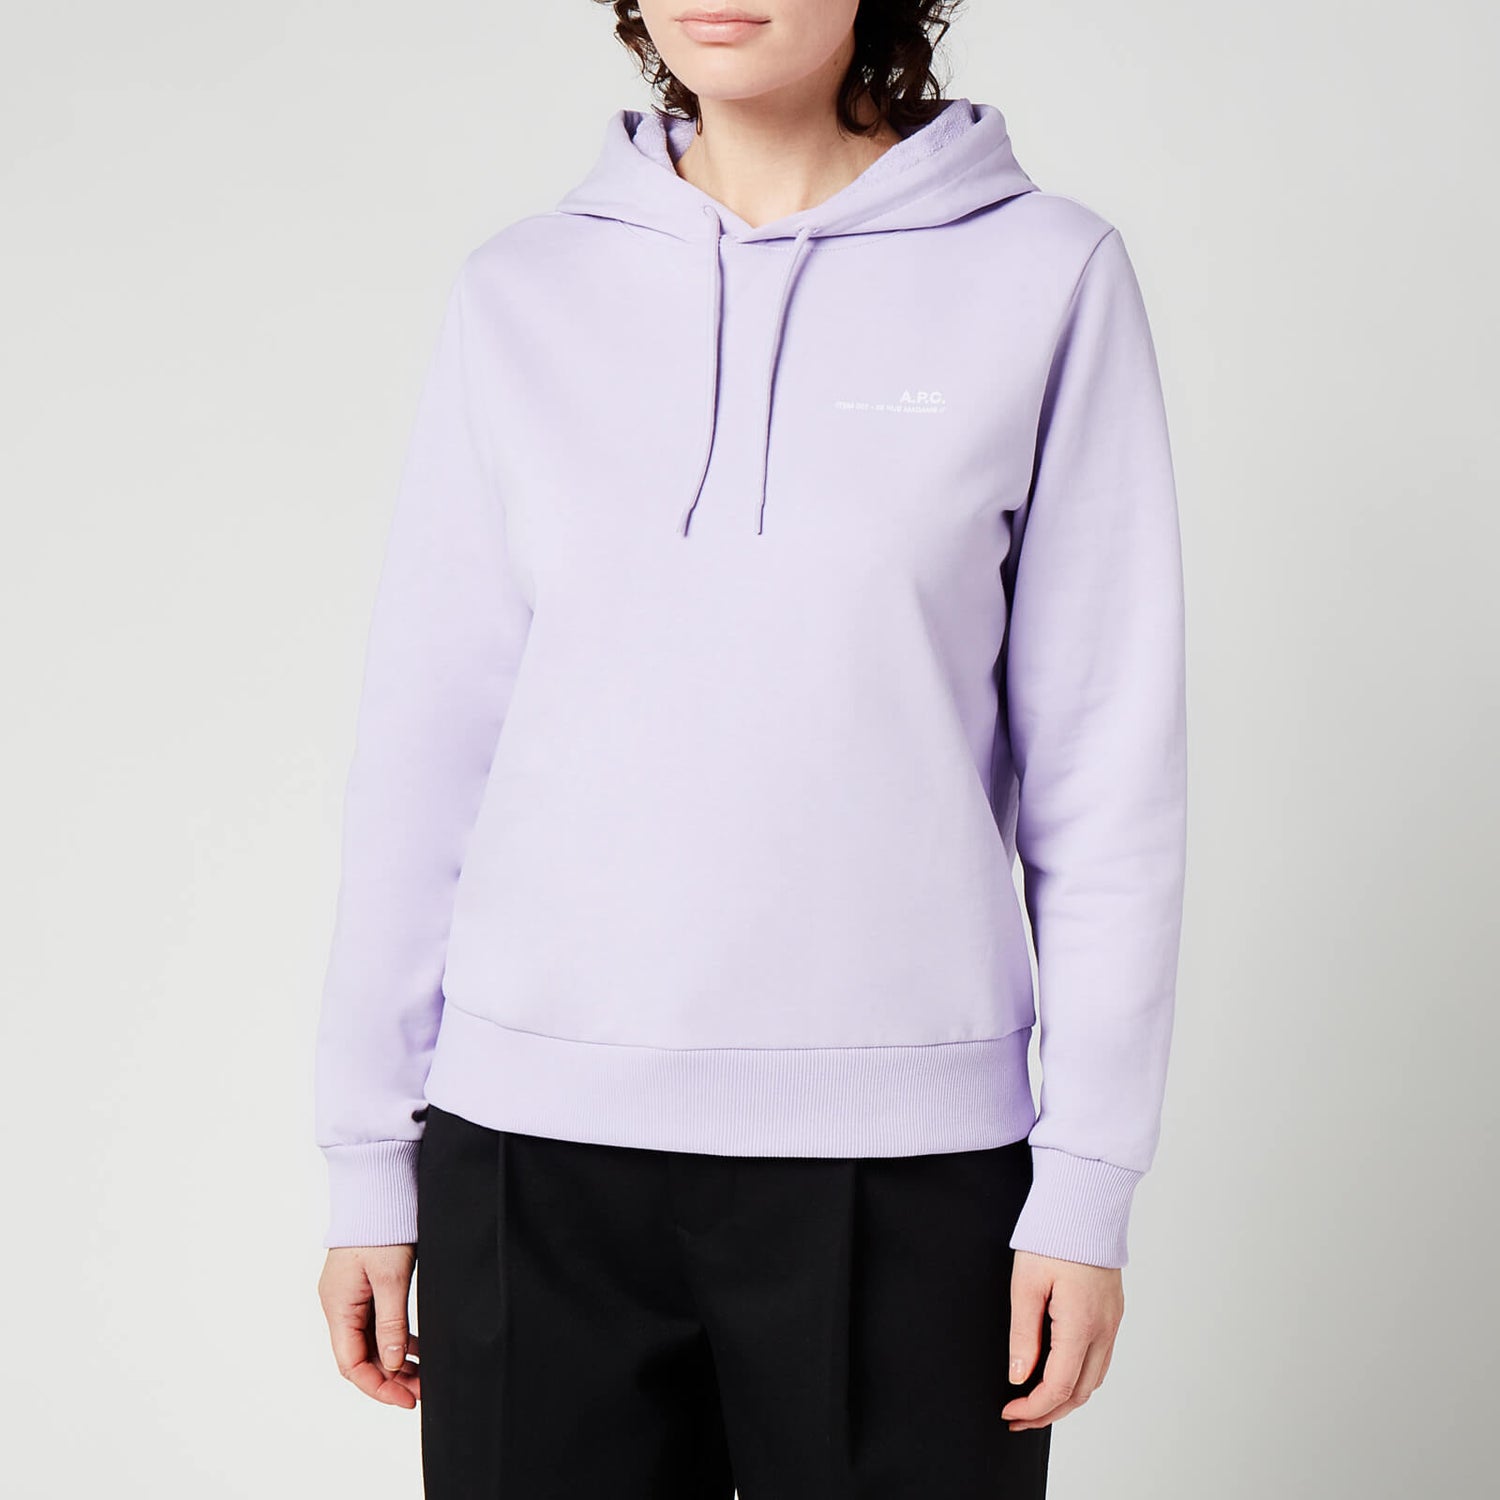 A.P.C. Women's Small Logo Hooded Top - Violet - XS